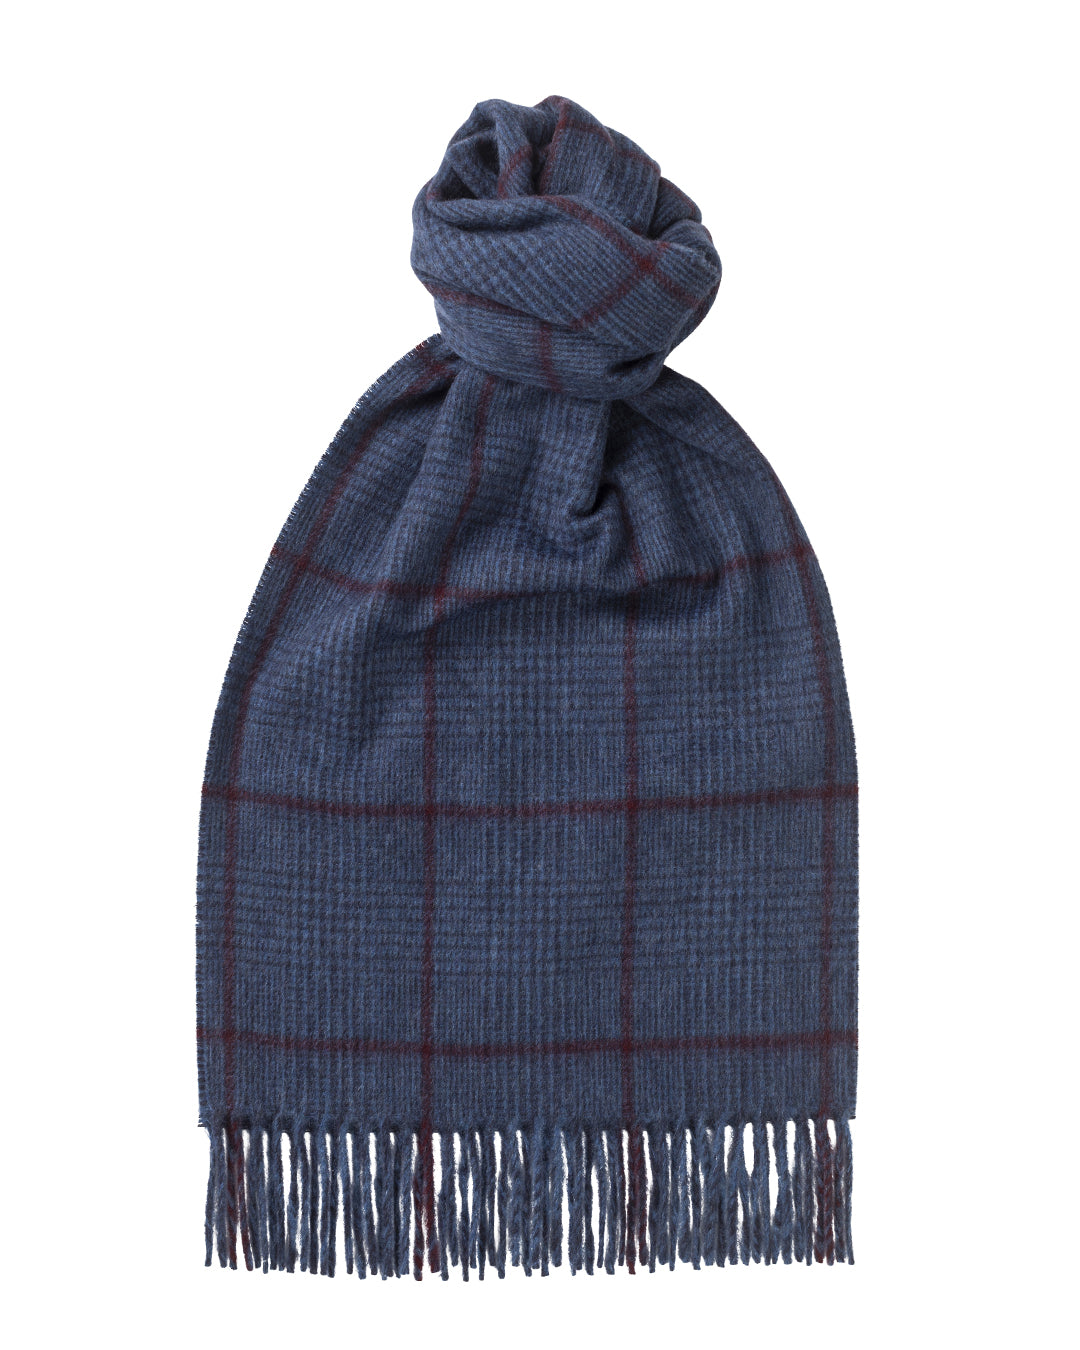 SALE - Traditional Check Cashmere Scarf